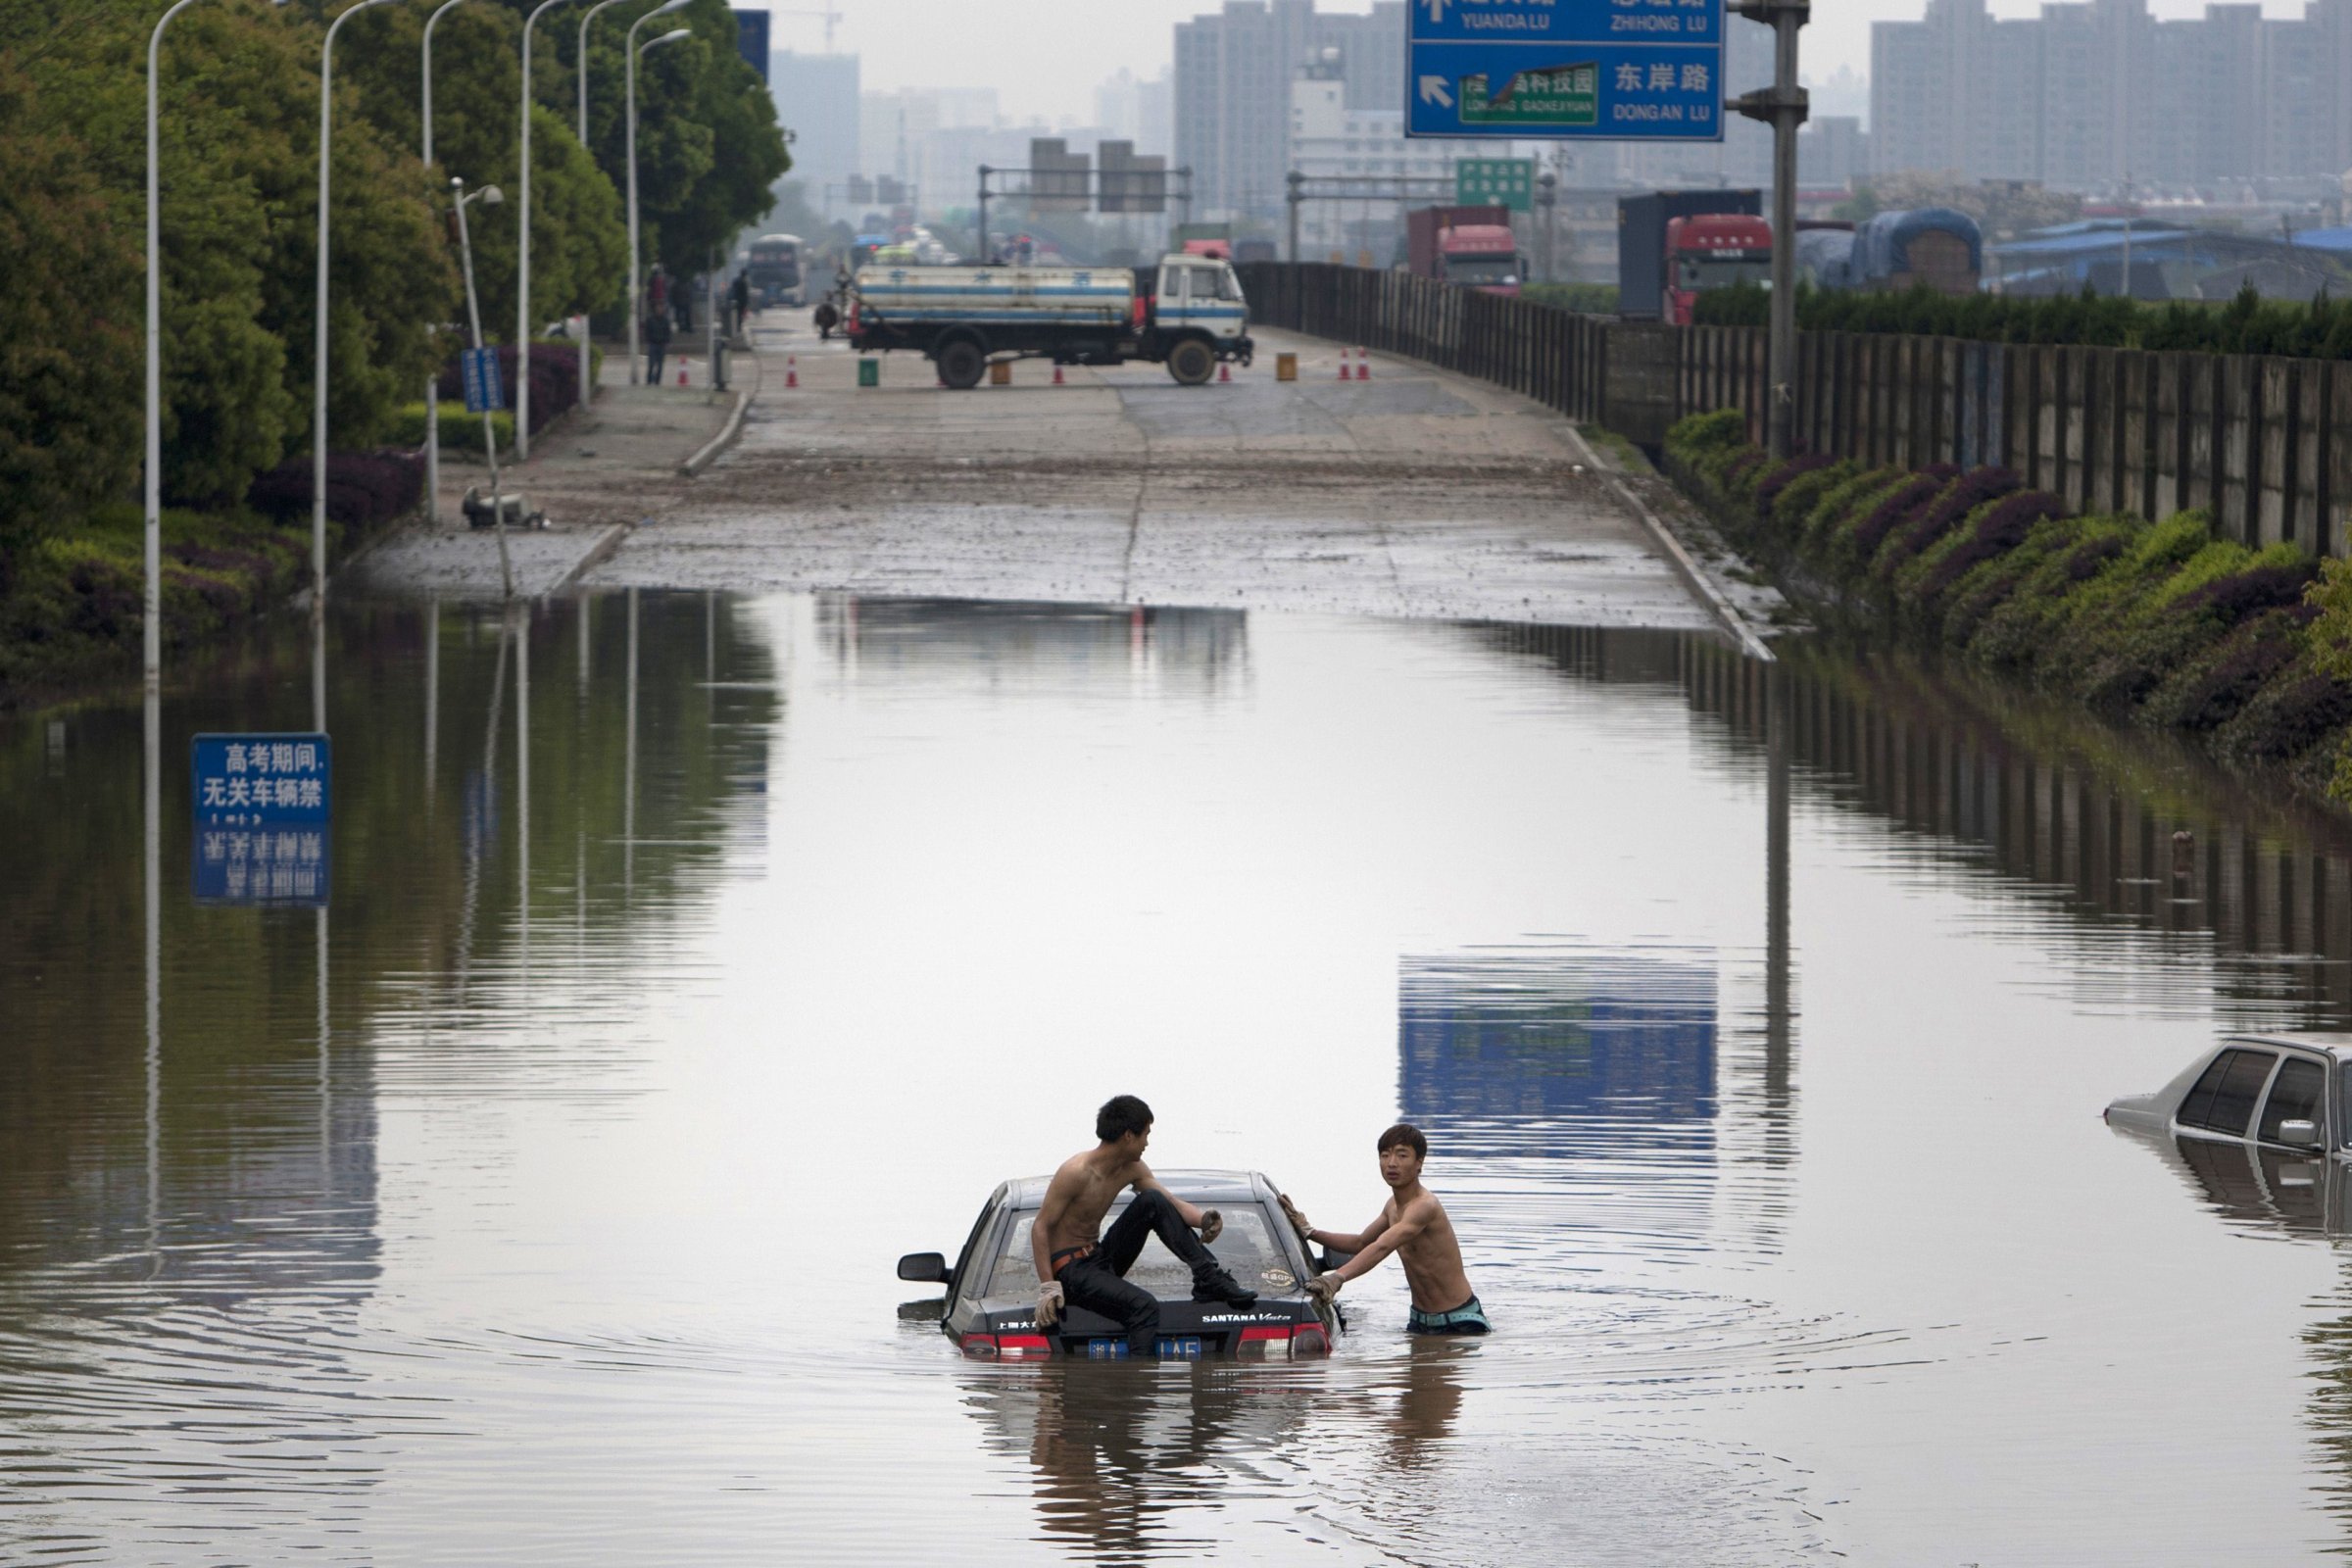 This picture shows two men attempting to push a car out of floodwaters after a storm swept Changsha, central China's Hunan province on taken on April 7, 2015